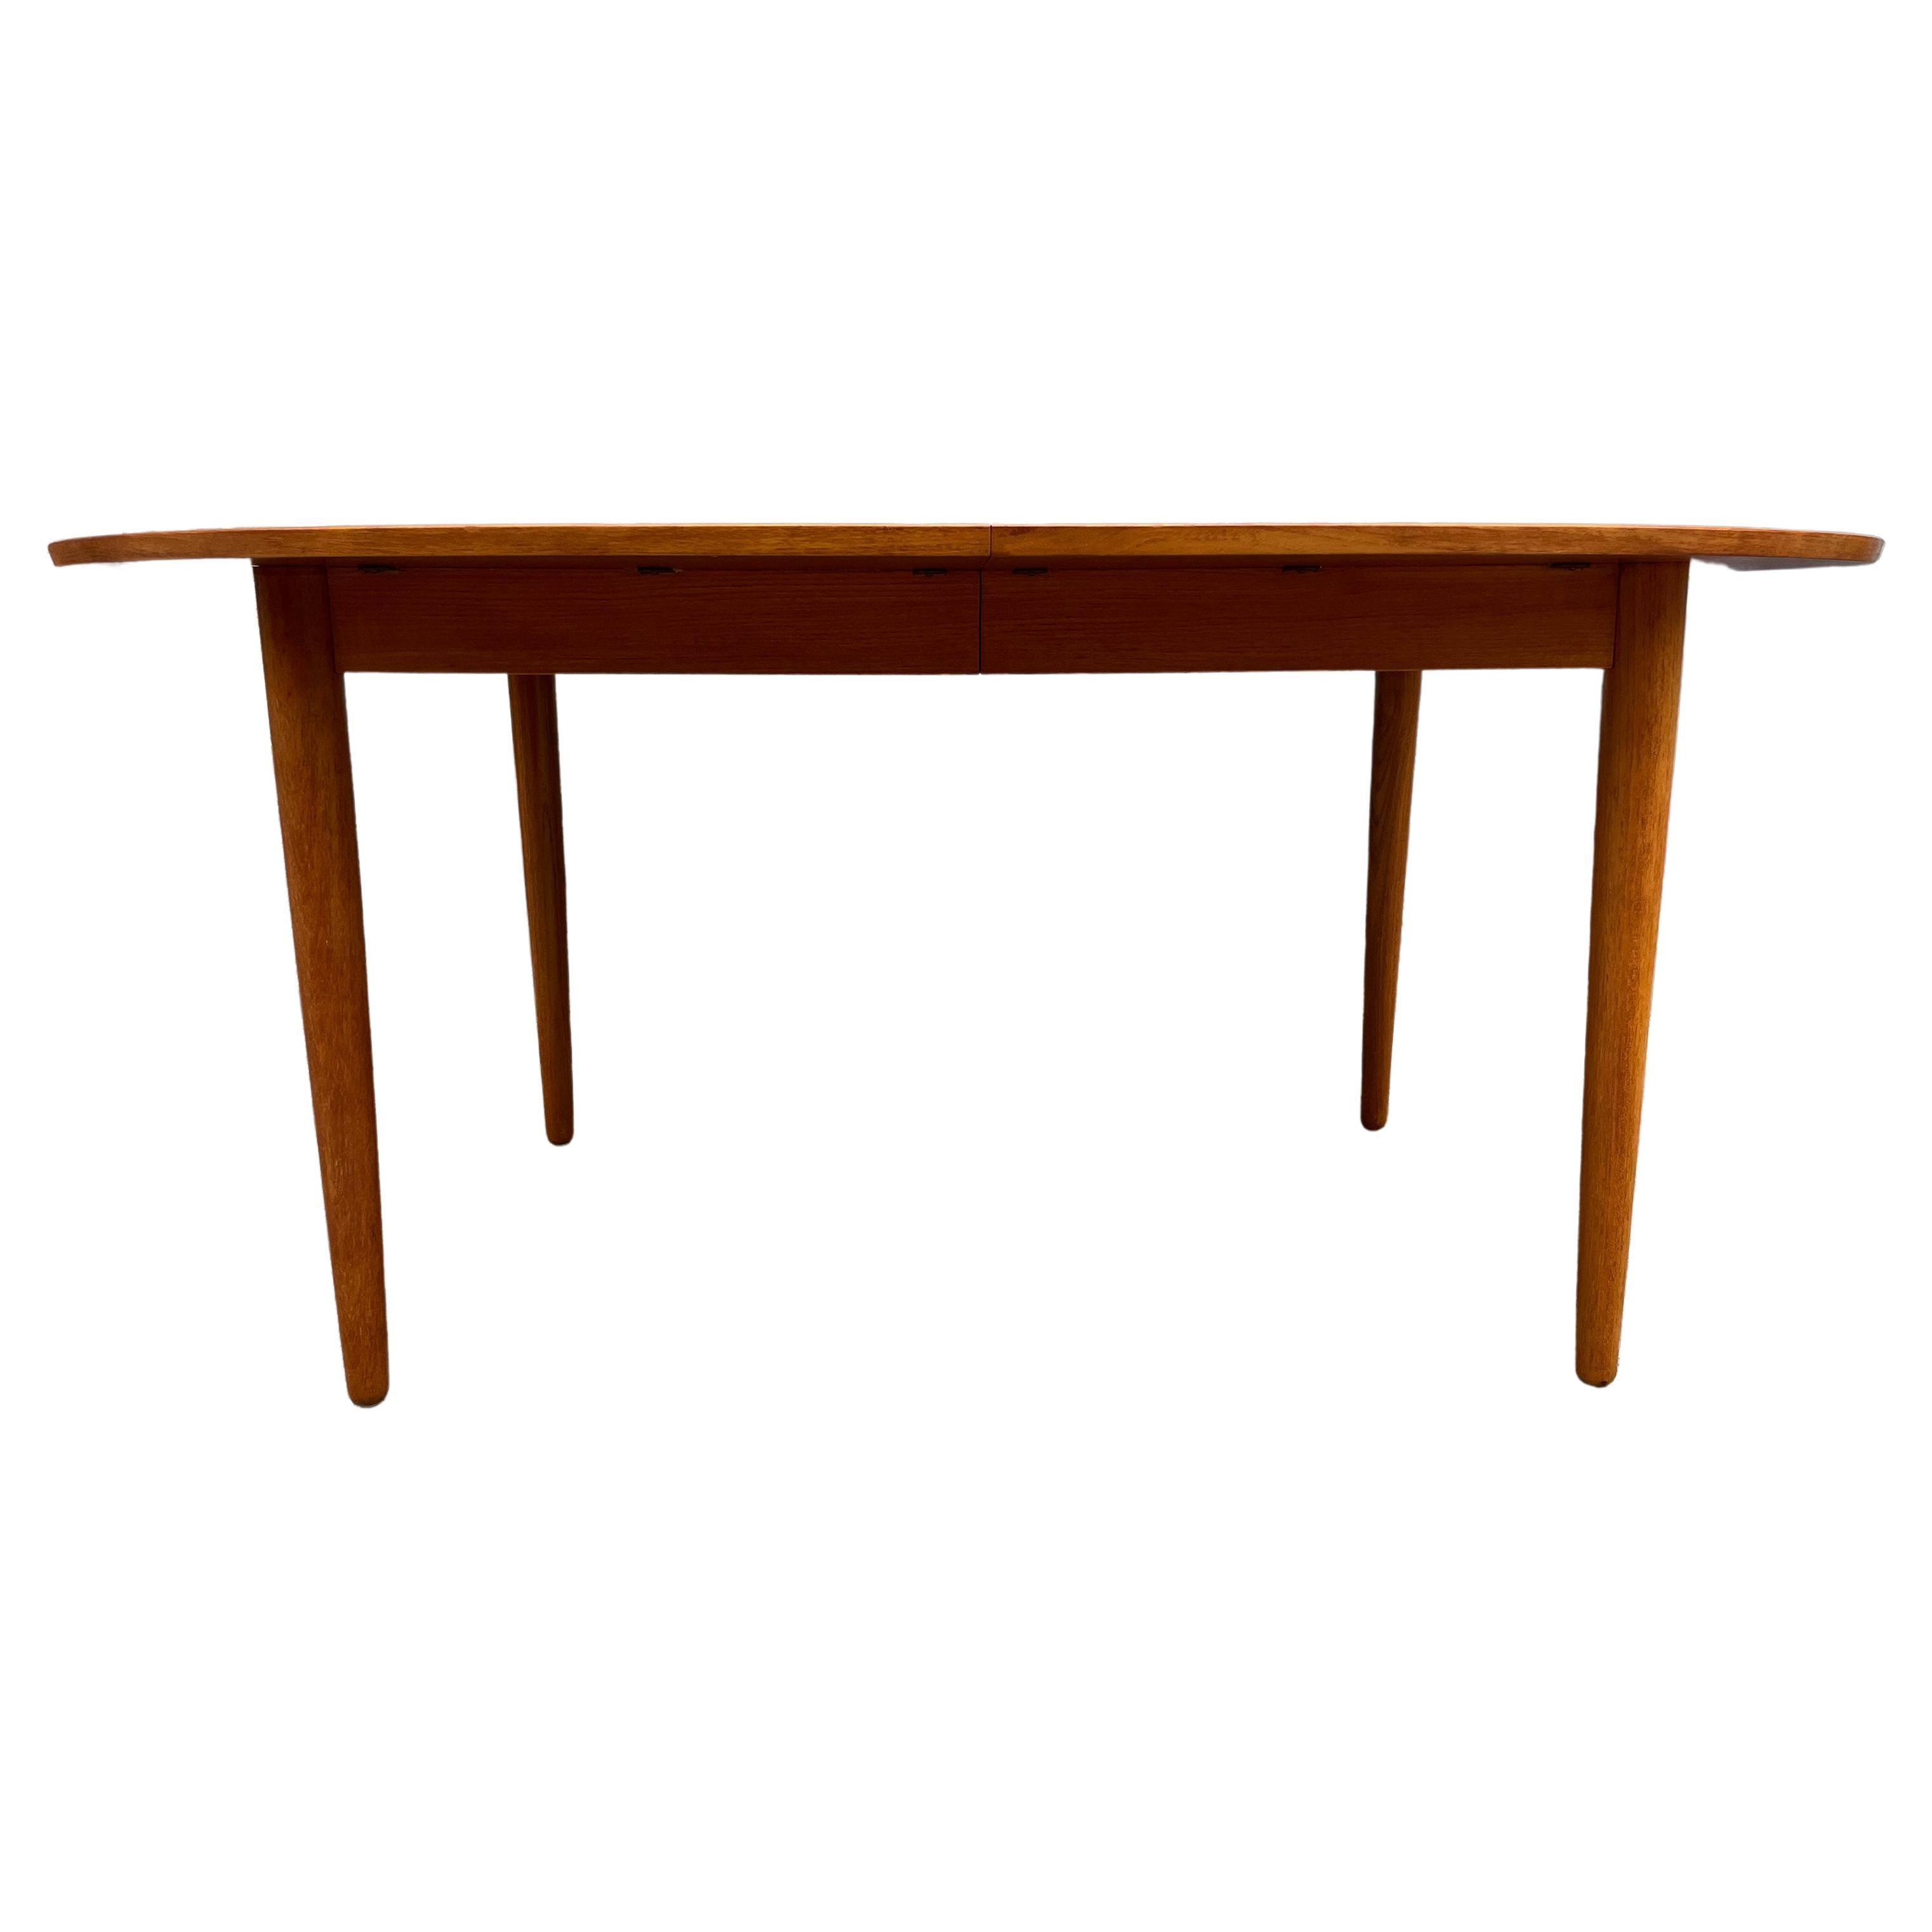 Stunning Mid century Teak oval Danish Modern extension dining table with (2) leaves. This table has Solid teak tapered wood legs. In the Style of Arne Vodder. This table is in Great vintage condition. Superb construction and both leaves match the